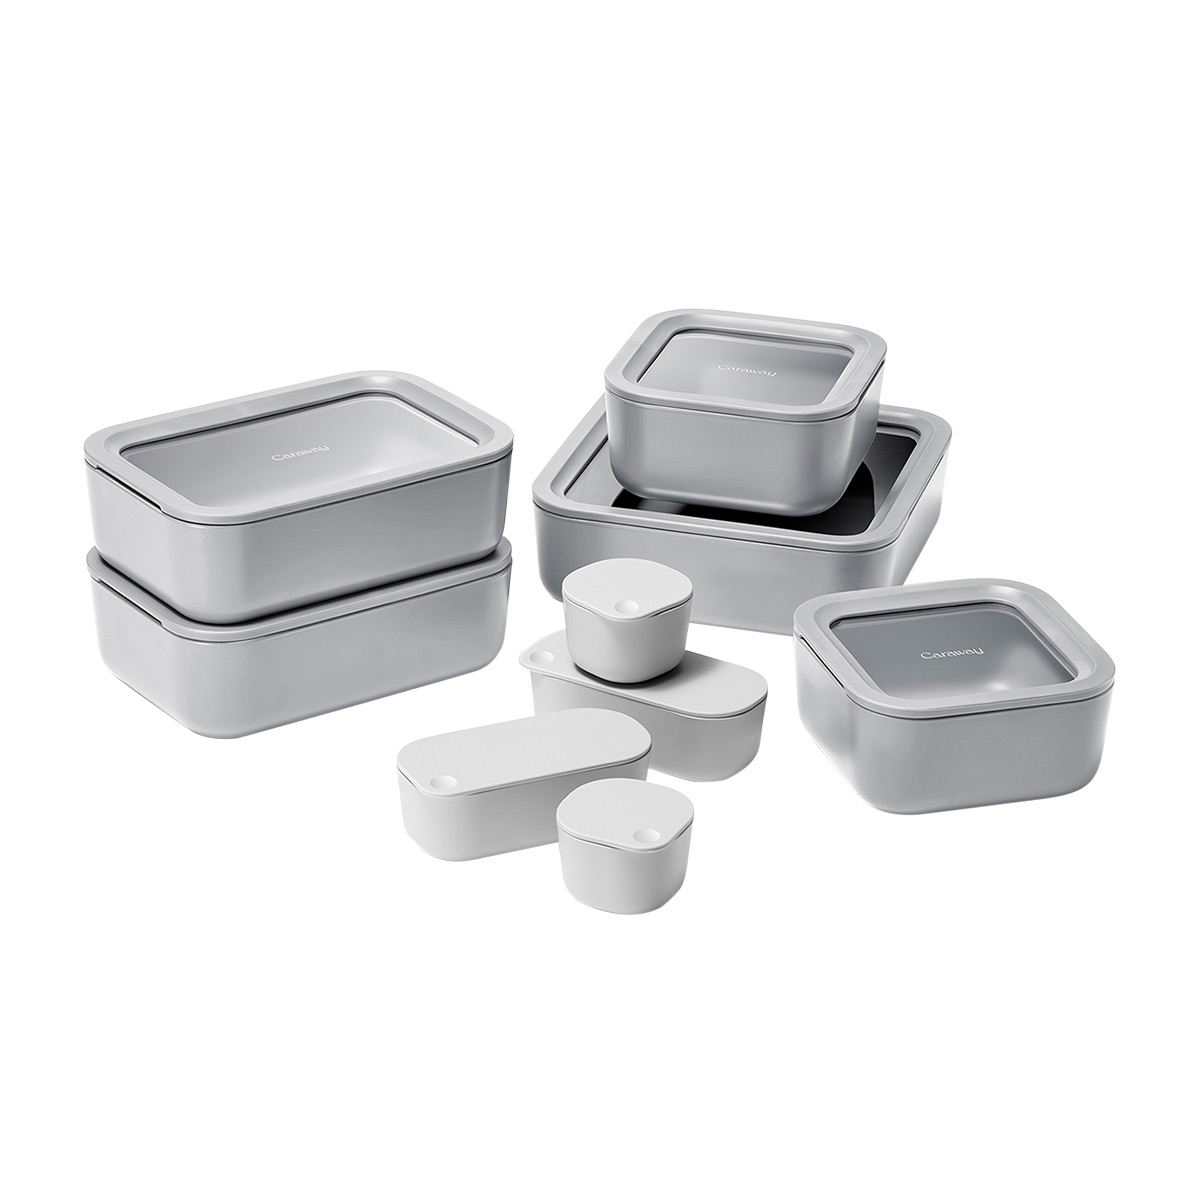 Container Store Caraway Home Non-Stick Bakeware Slate Set of 11 - ShopStyle  Fry Pans & Skillets